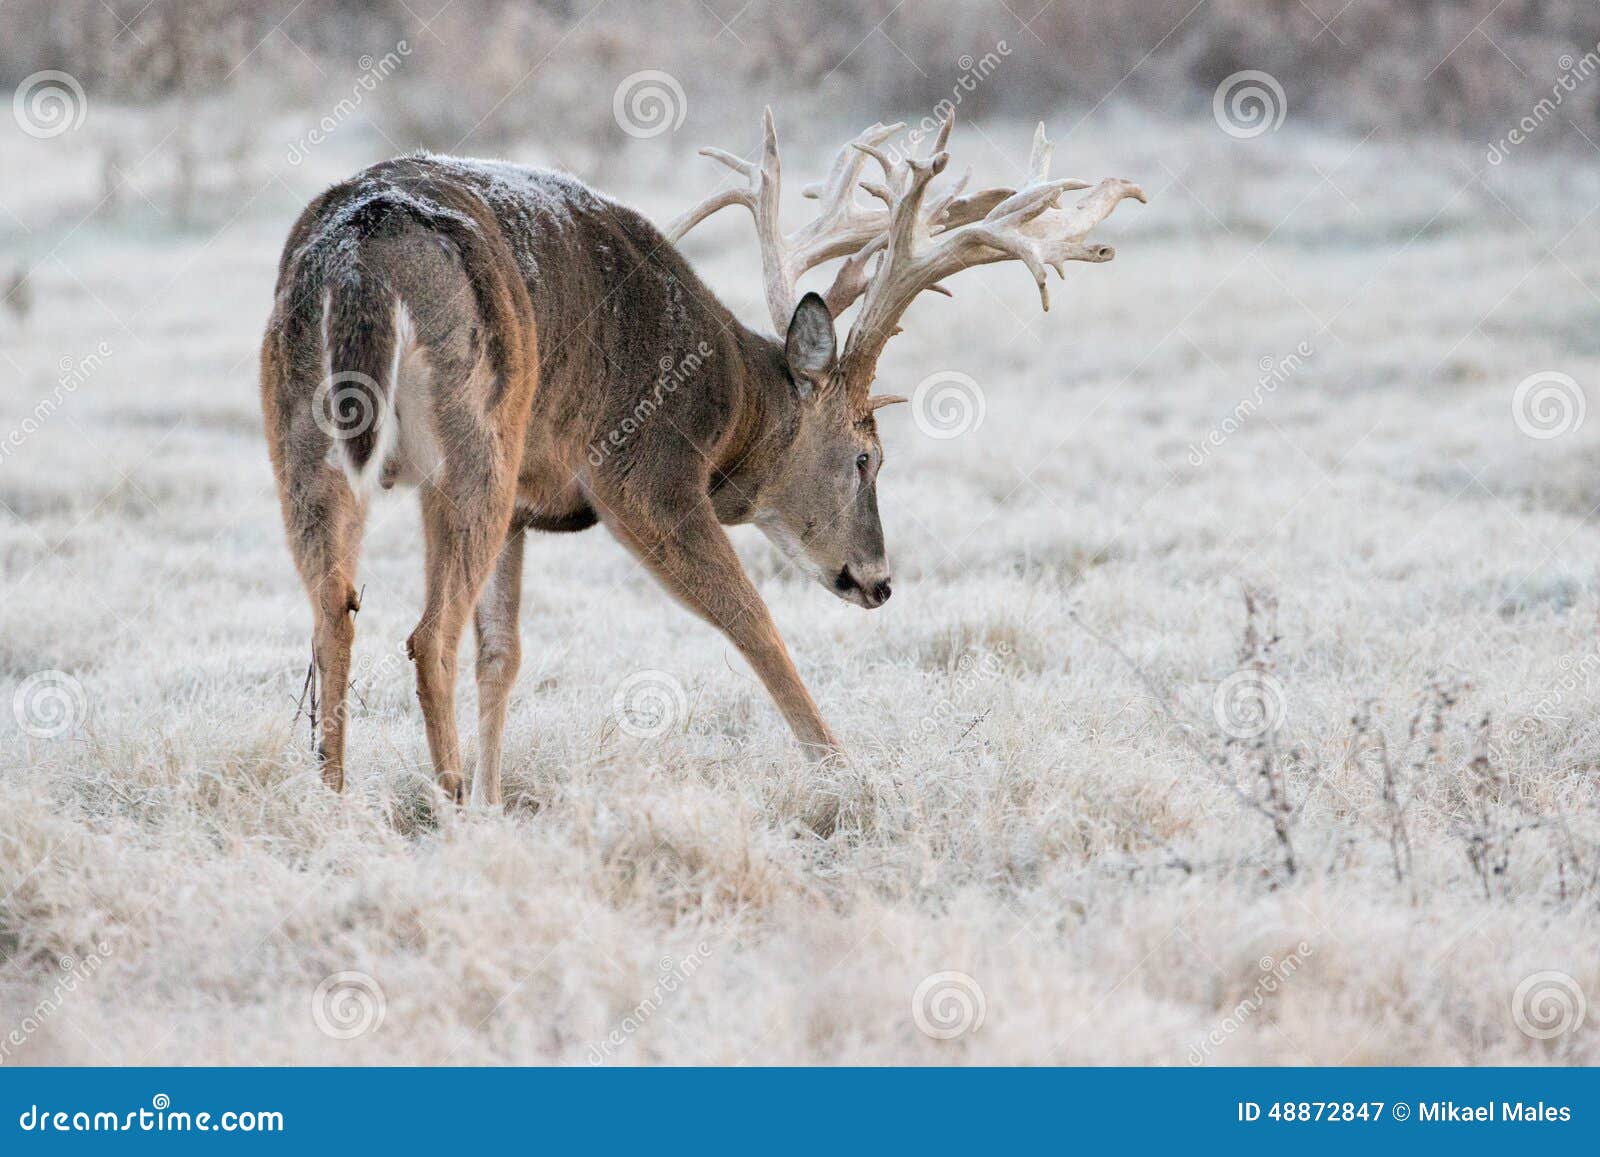 huge non-typical whitetail buck starting to make a scrape